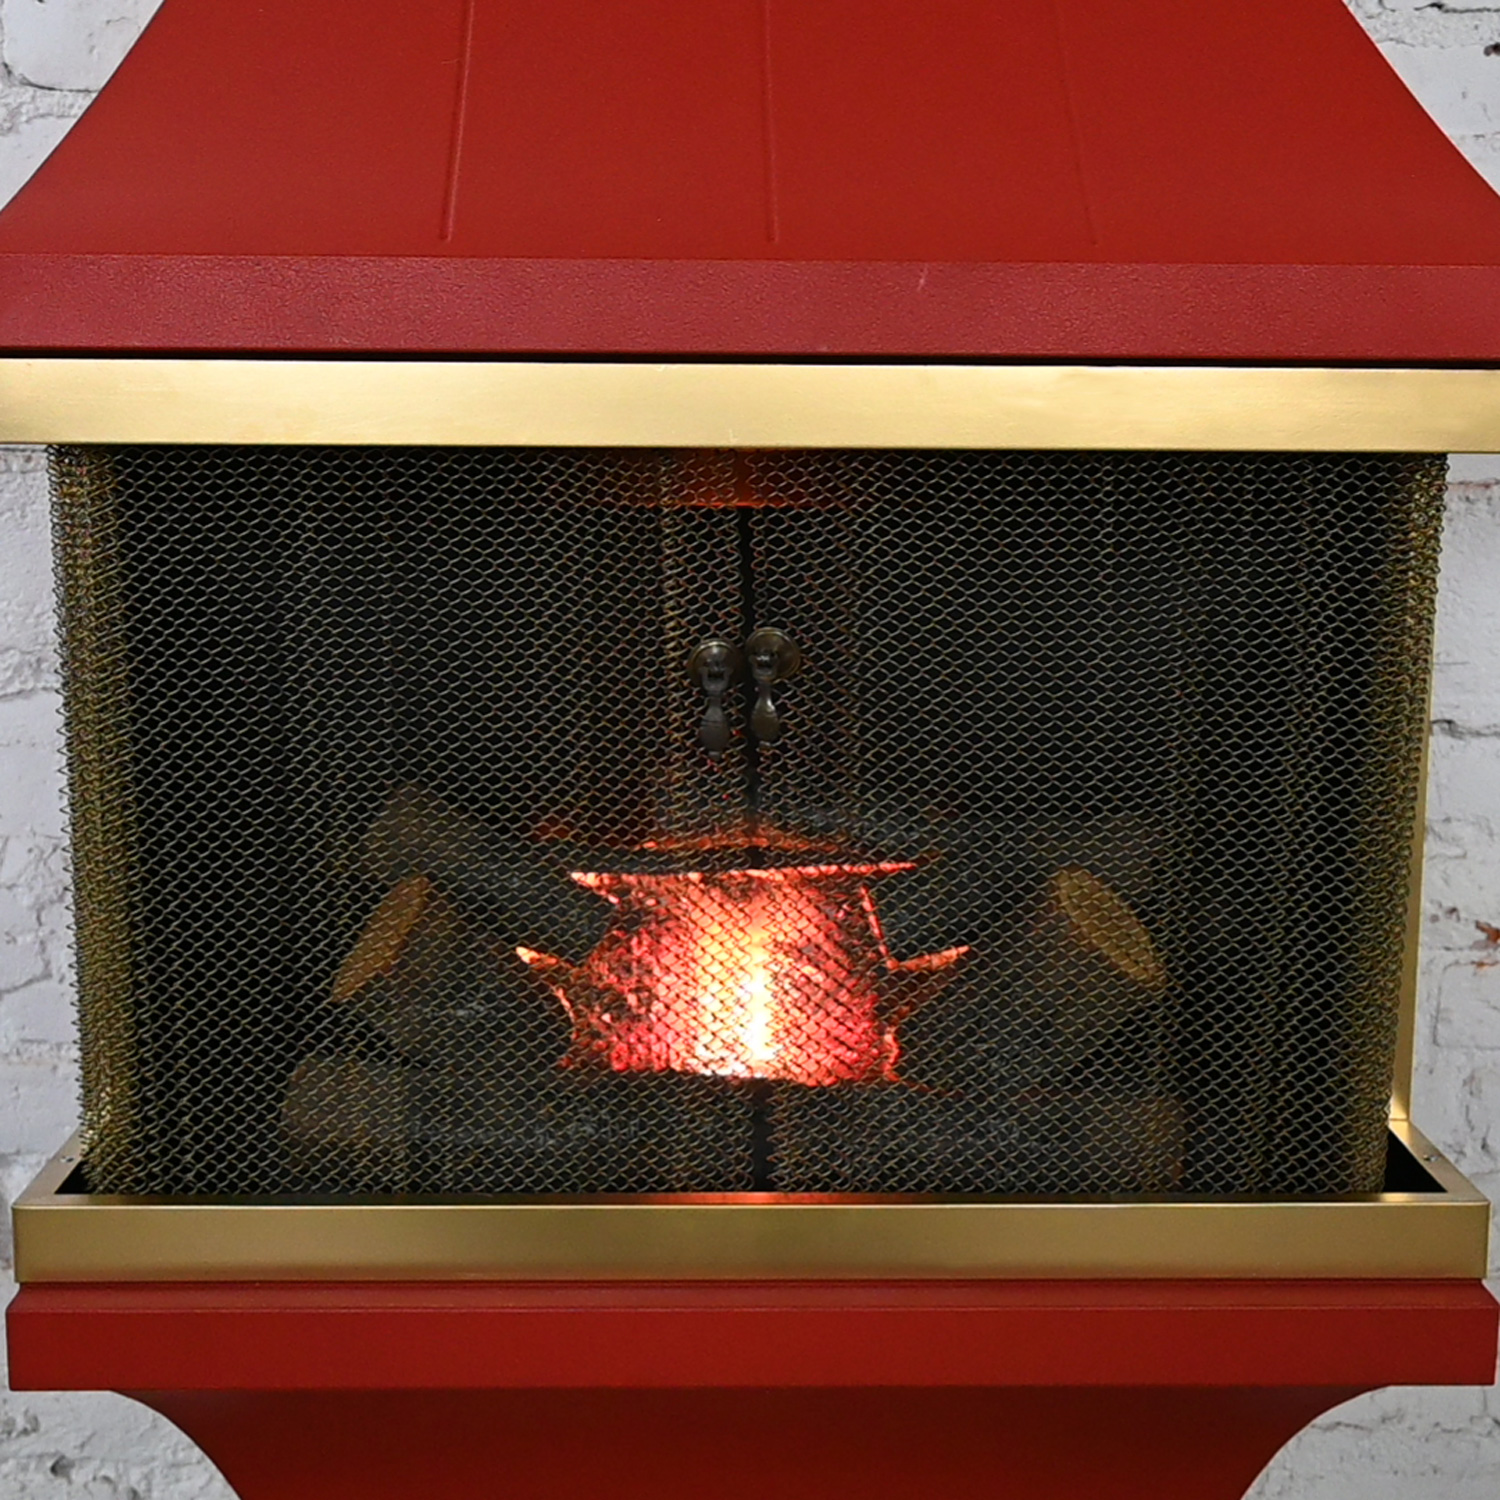 1960’s Mid-Century Modern Electric Wall Fireplace Orange with Gold Tone Trim Attributed to Montgomery Ward Style House